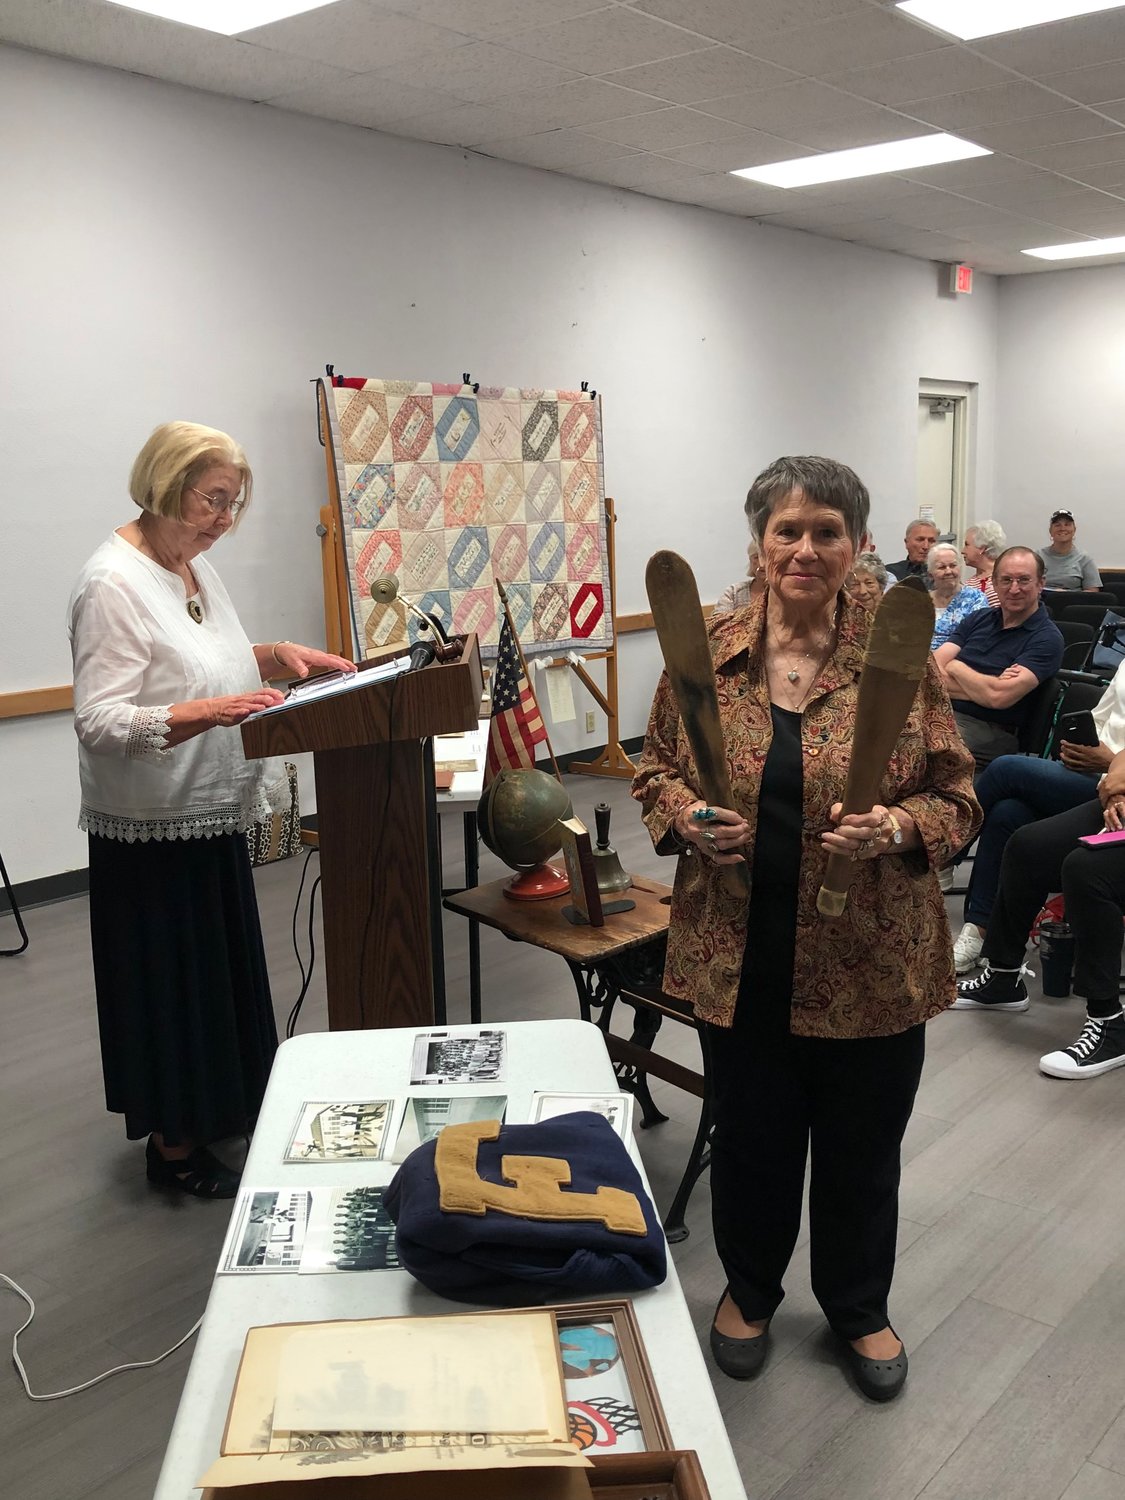 Commissioner Ulna McWhorter shares stories and Saundra Burge displays a girls’ paddle and a boys’ paddle from early Alba. The White family displayed several items including J.U. Searcy’s cane and satchel.